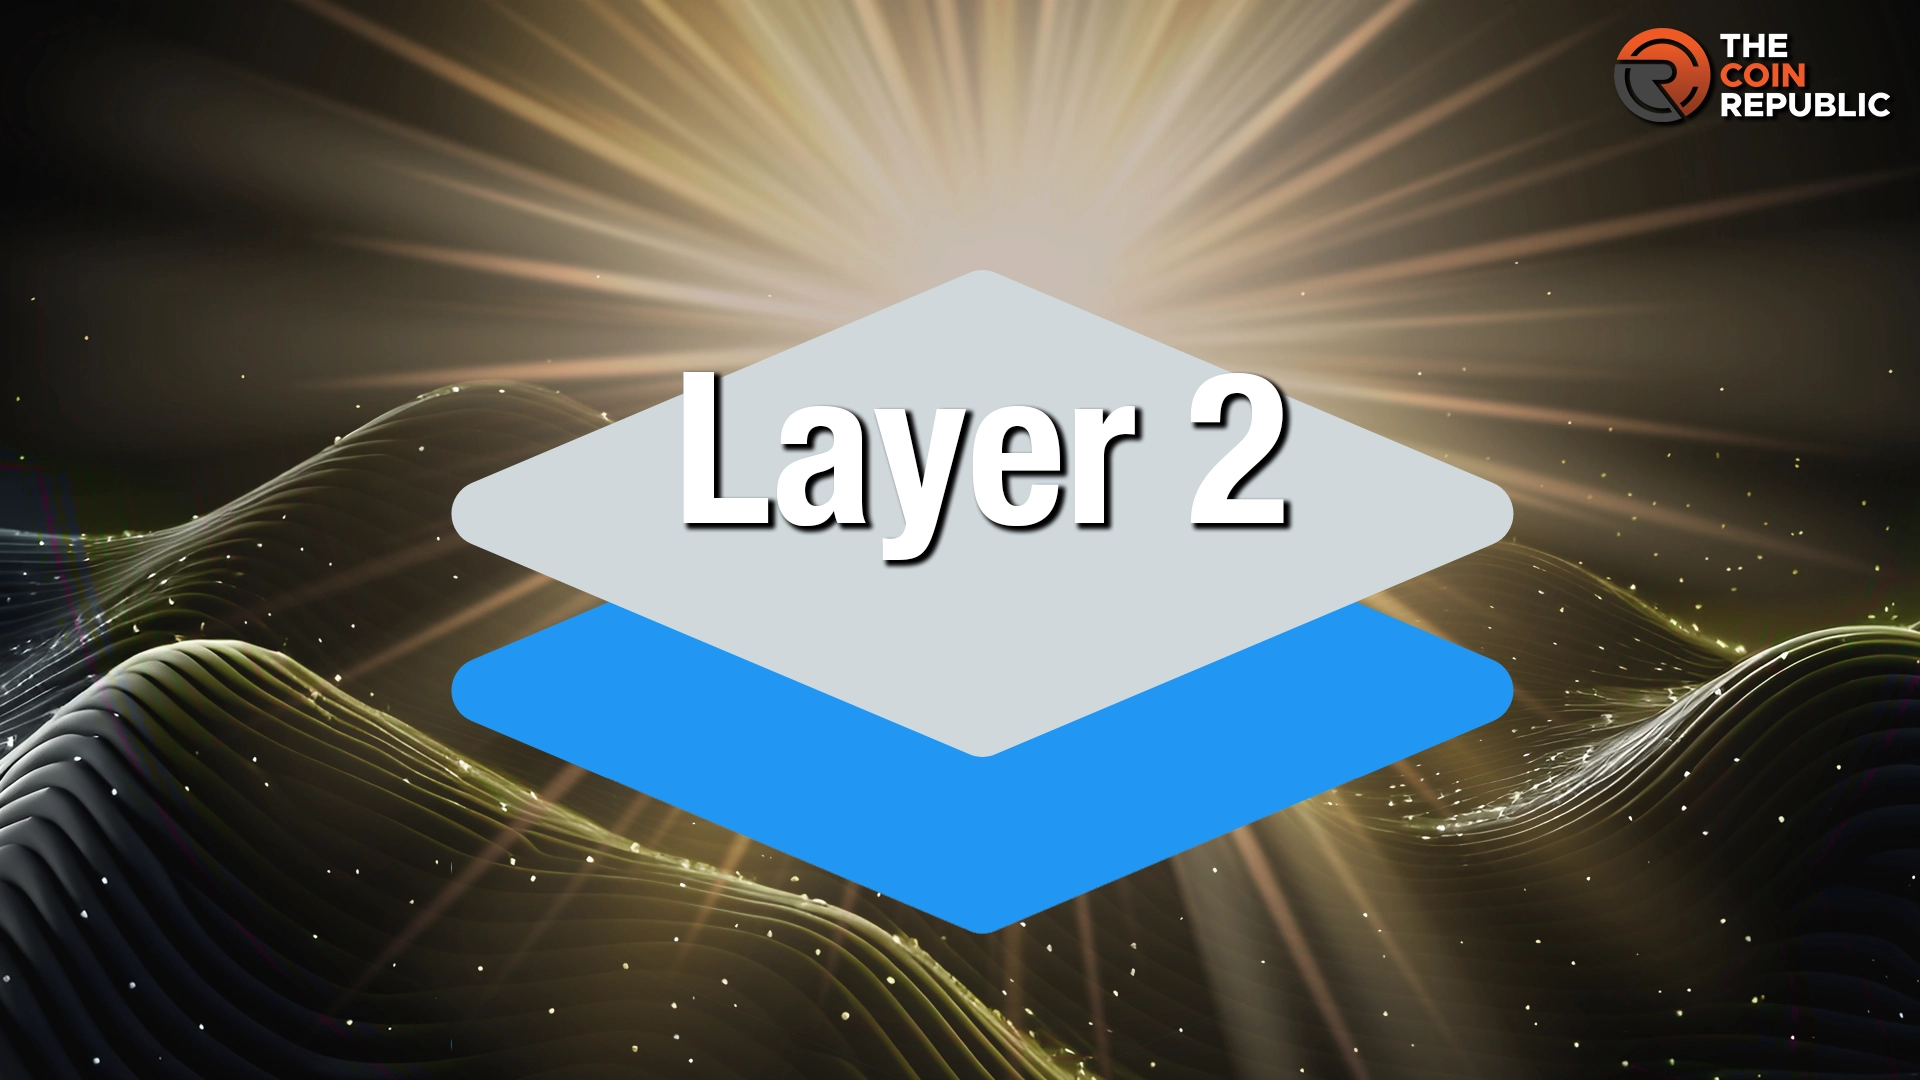 A Look Into The Top 4 Layer 2 Protocols And Their Performance